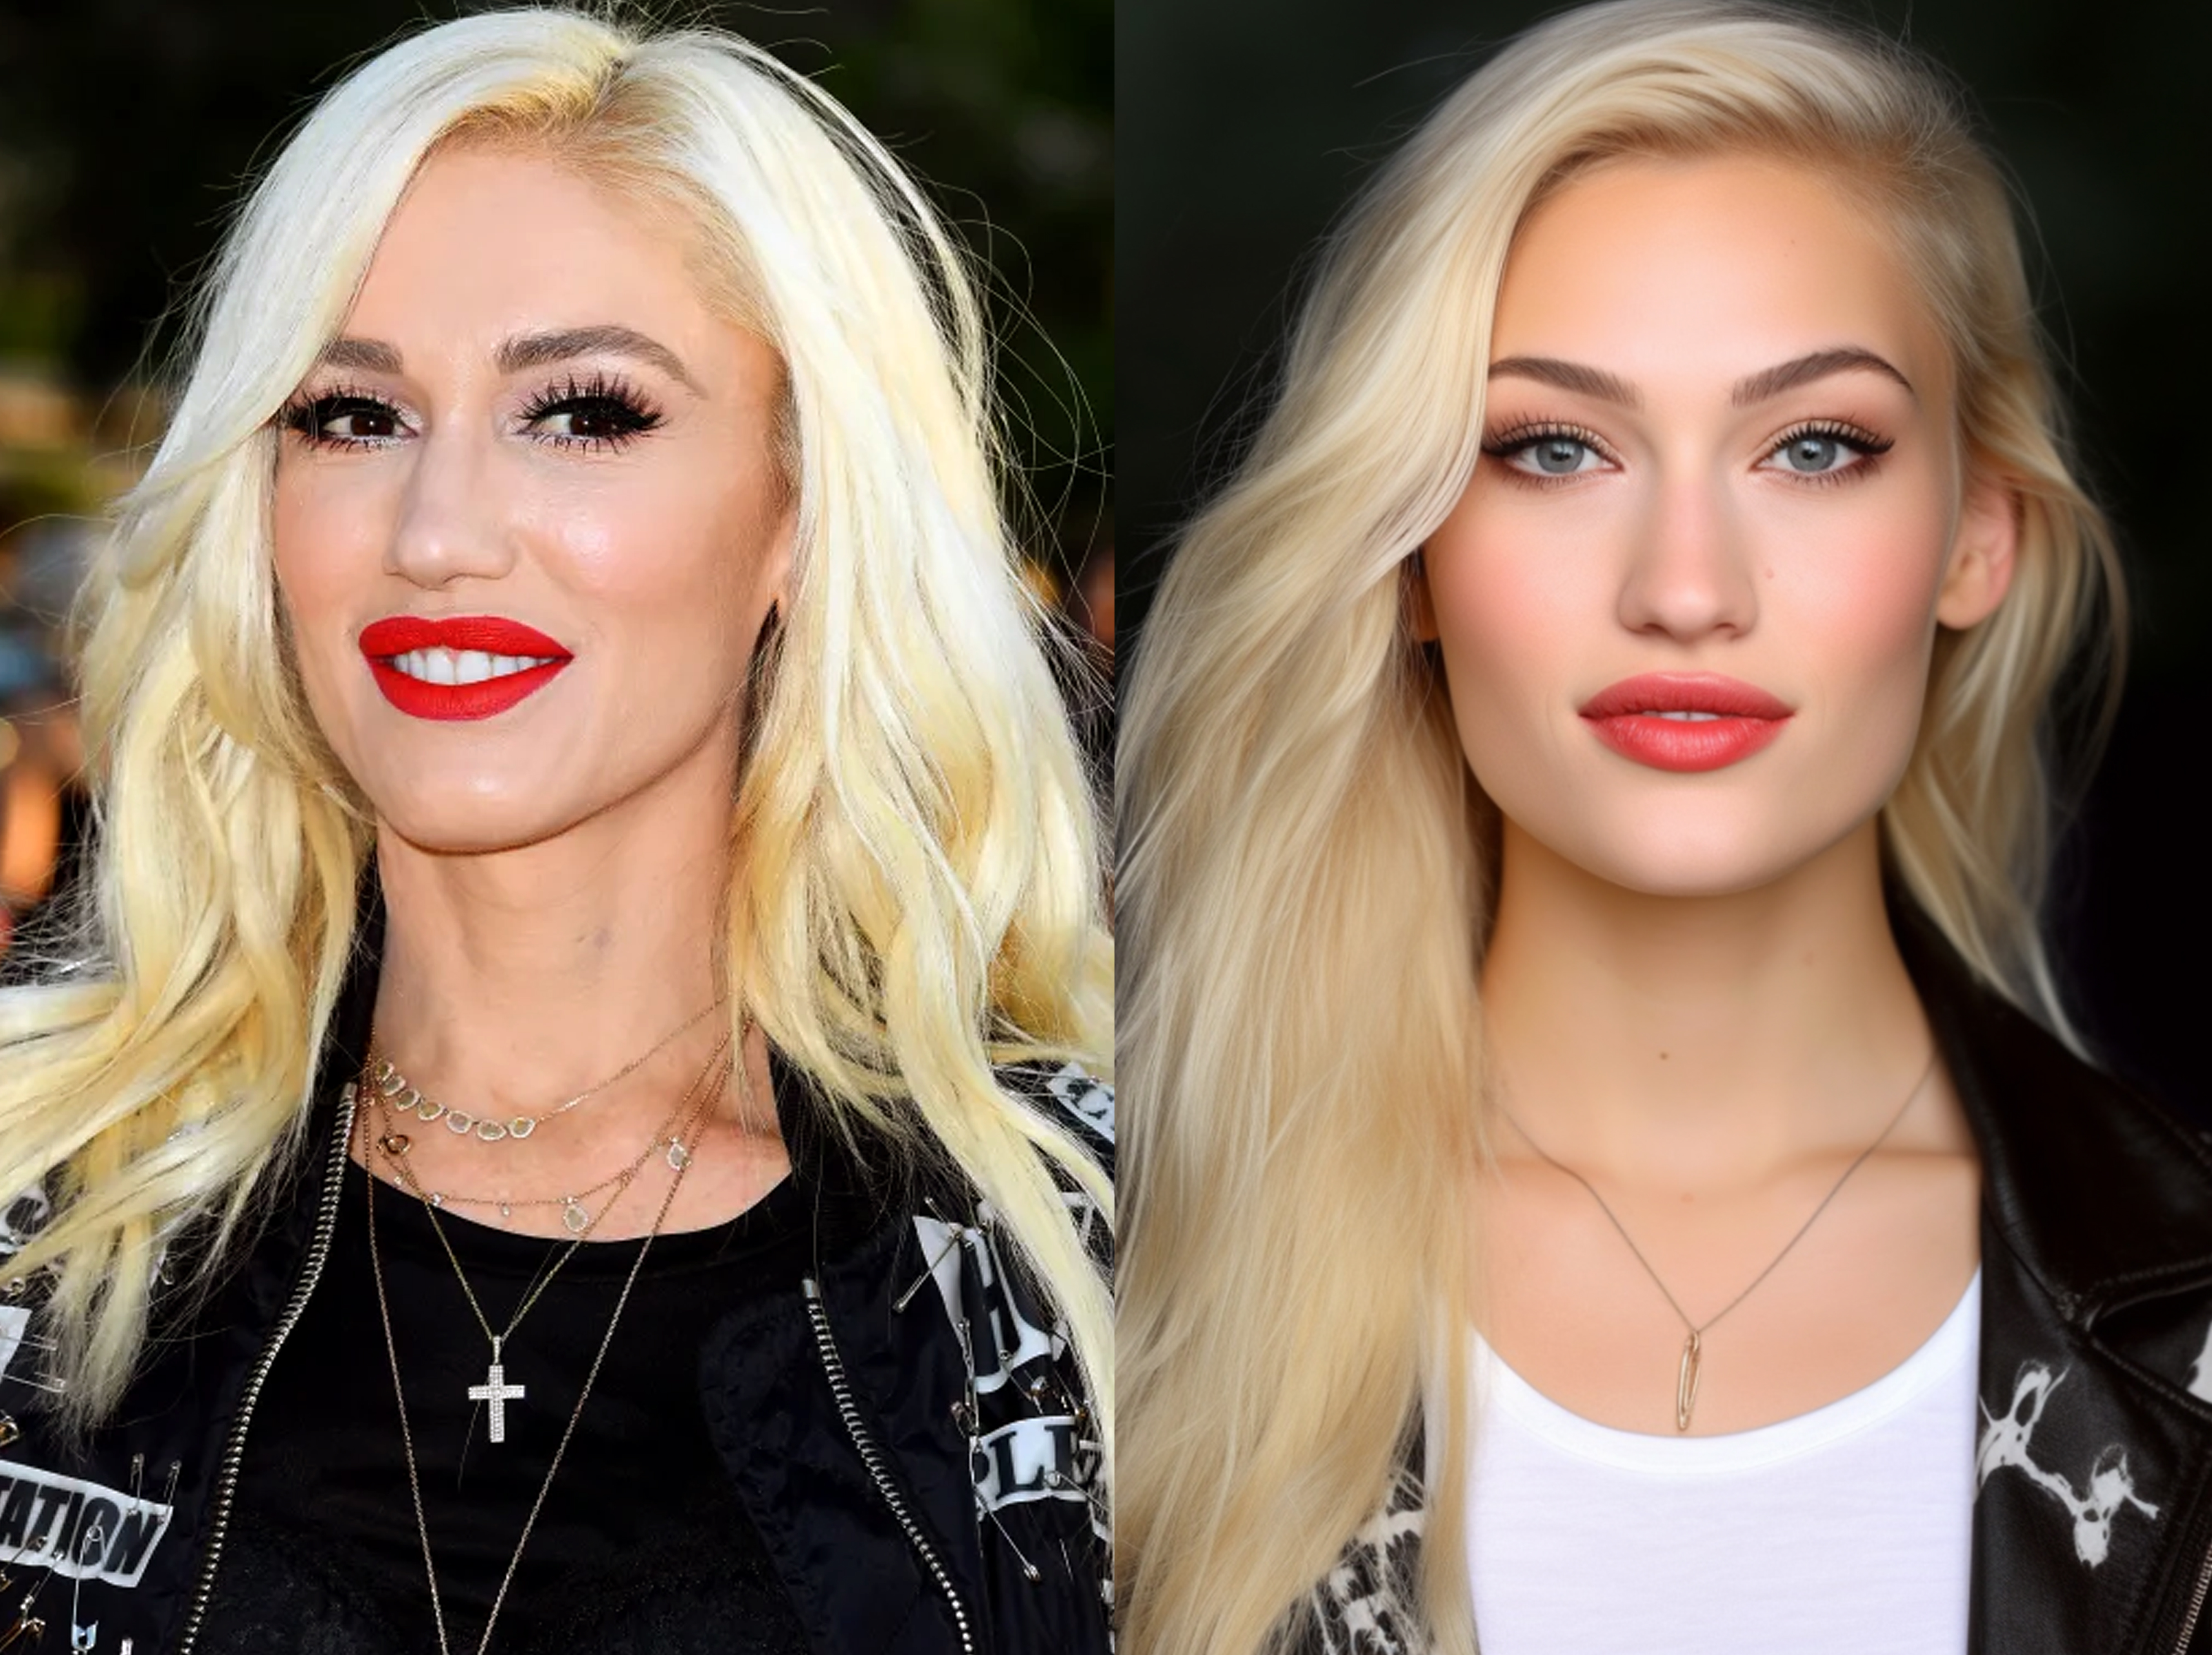 How Gwena Stefani would look with natural make up according to an AI-generated photo | Source: Midjourney | Getty Images